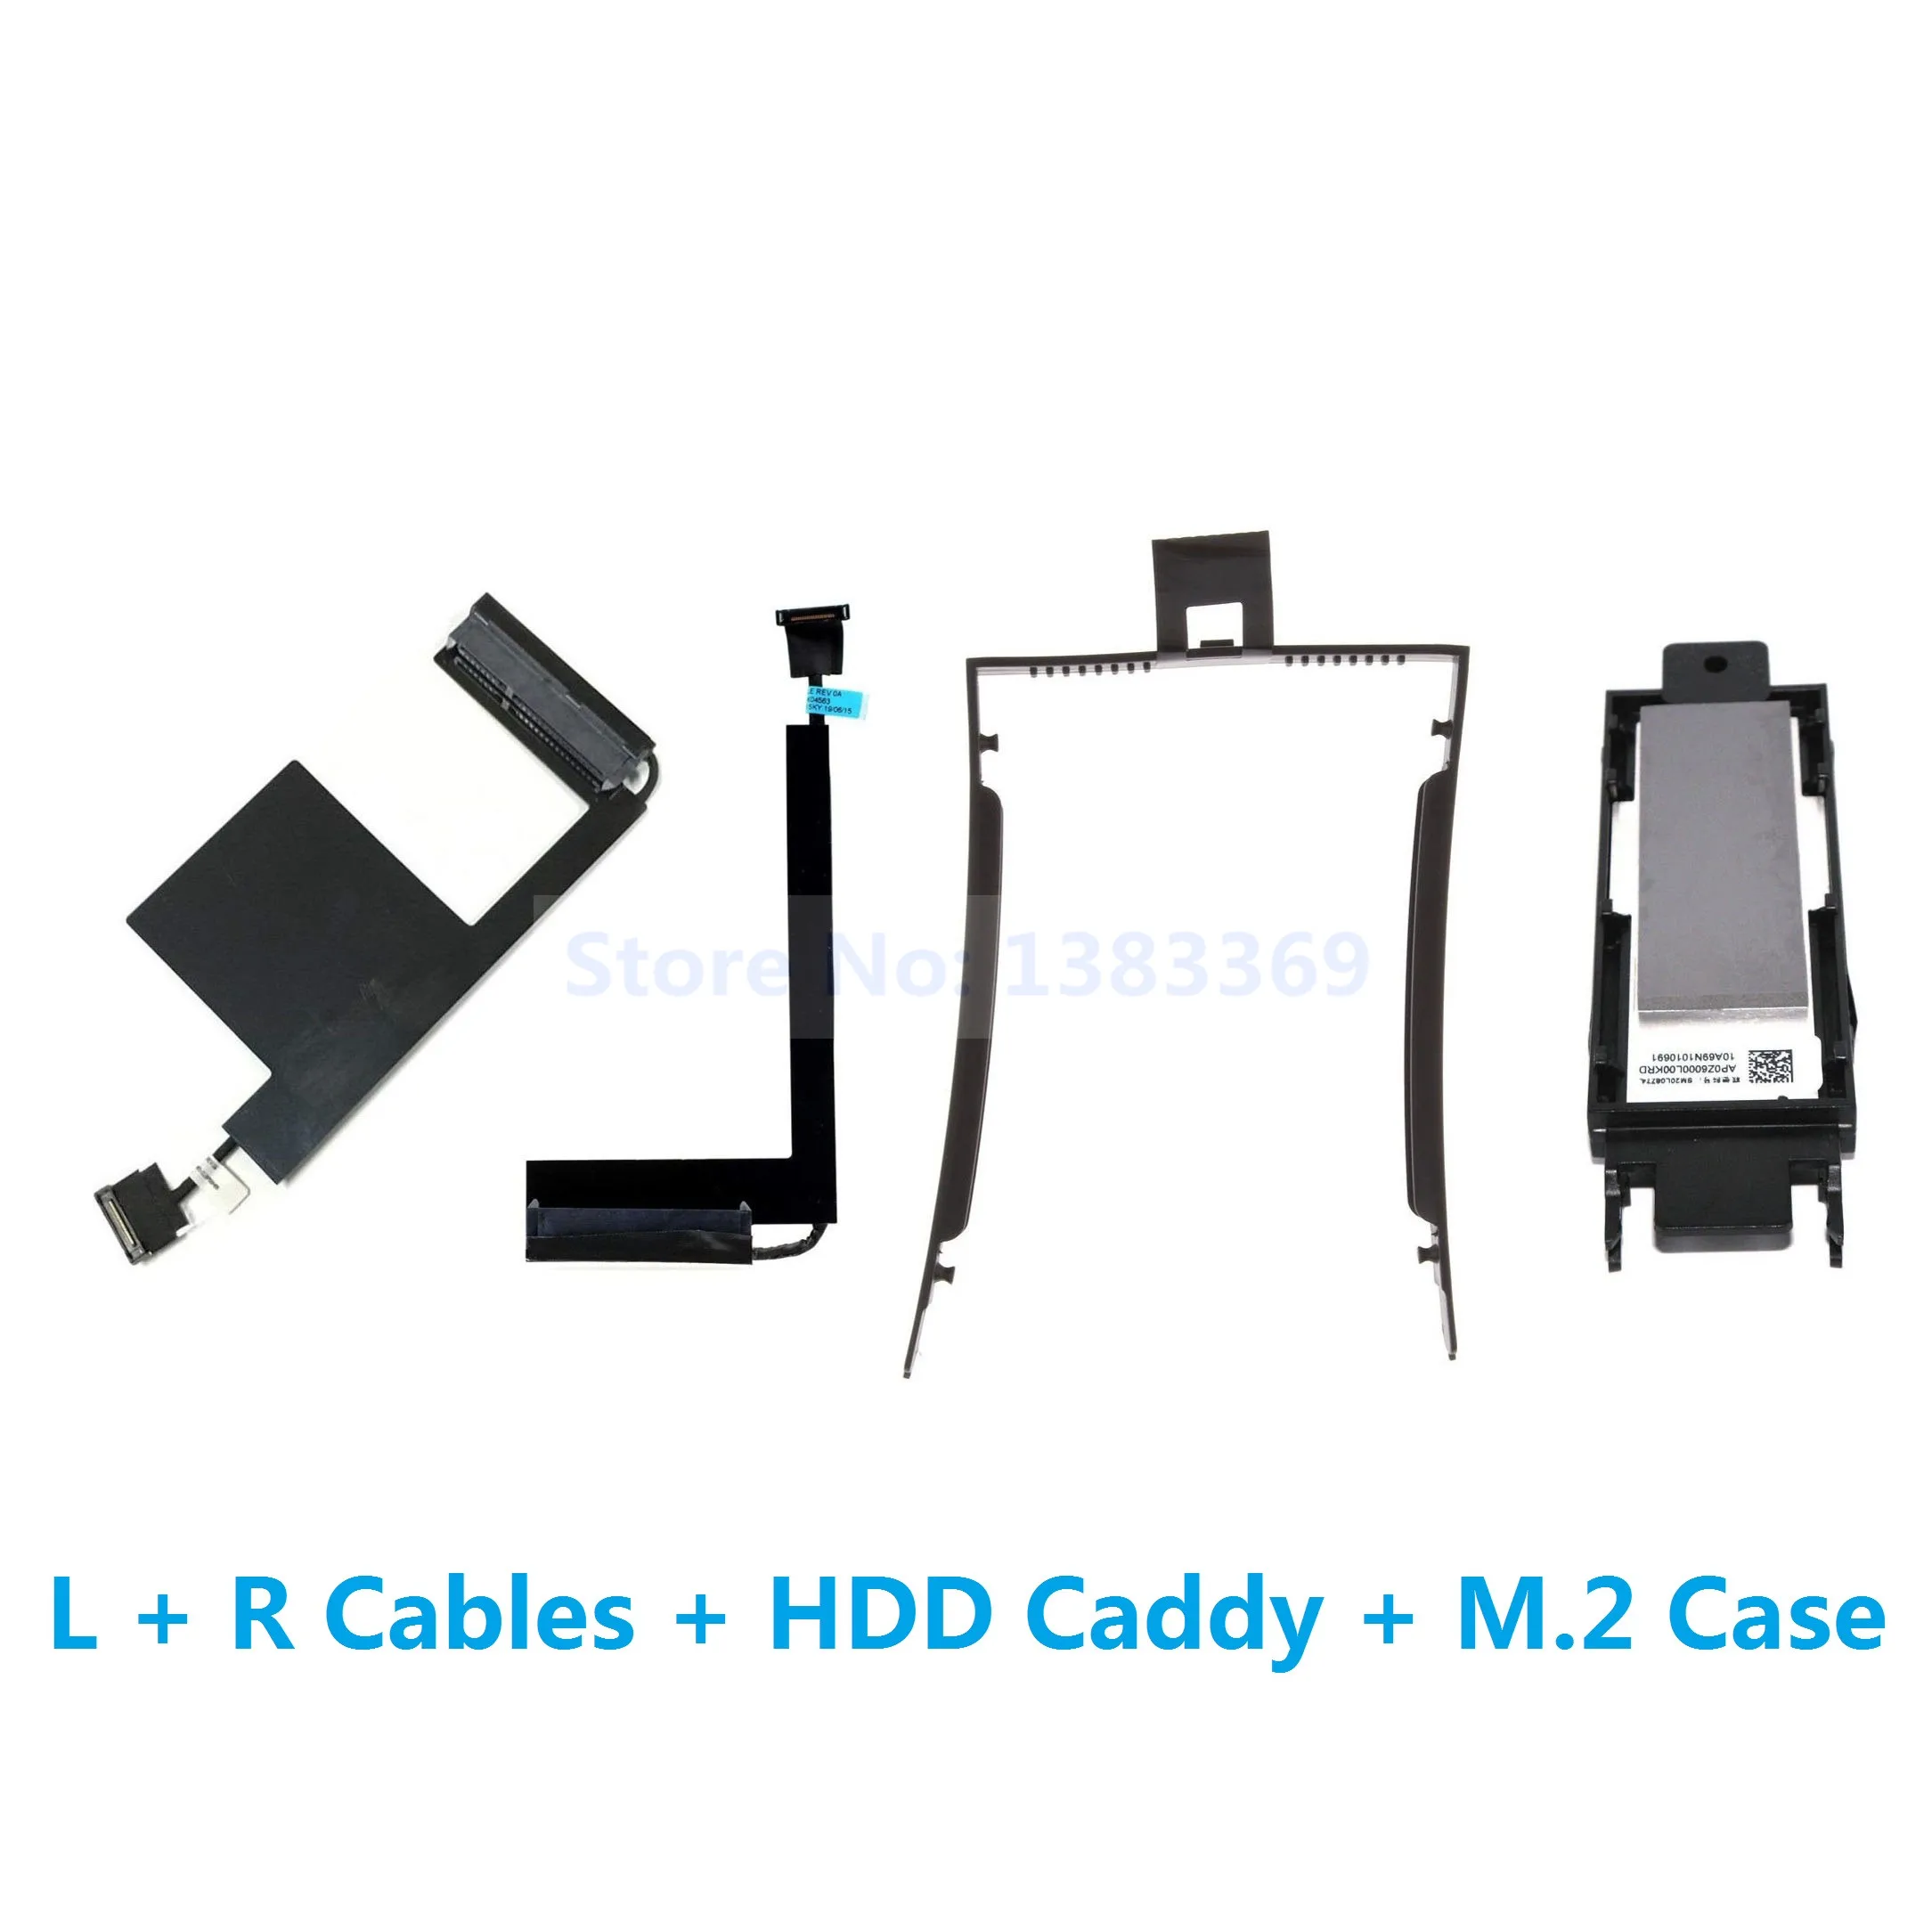 Occus Cables HDD Hard Driver Caddy Bracket Tray Holder for Lenovo Thinkpad P50 P51 P70 Cable Length: Other 